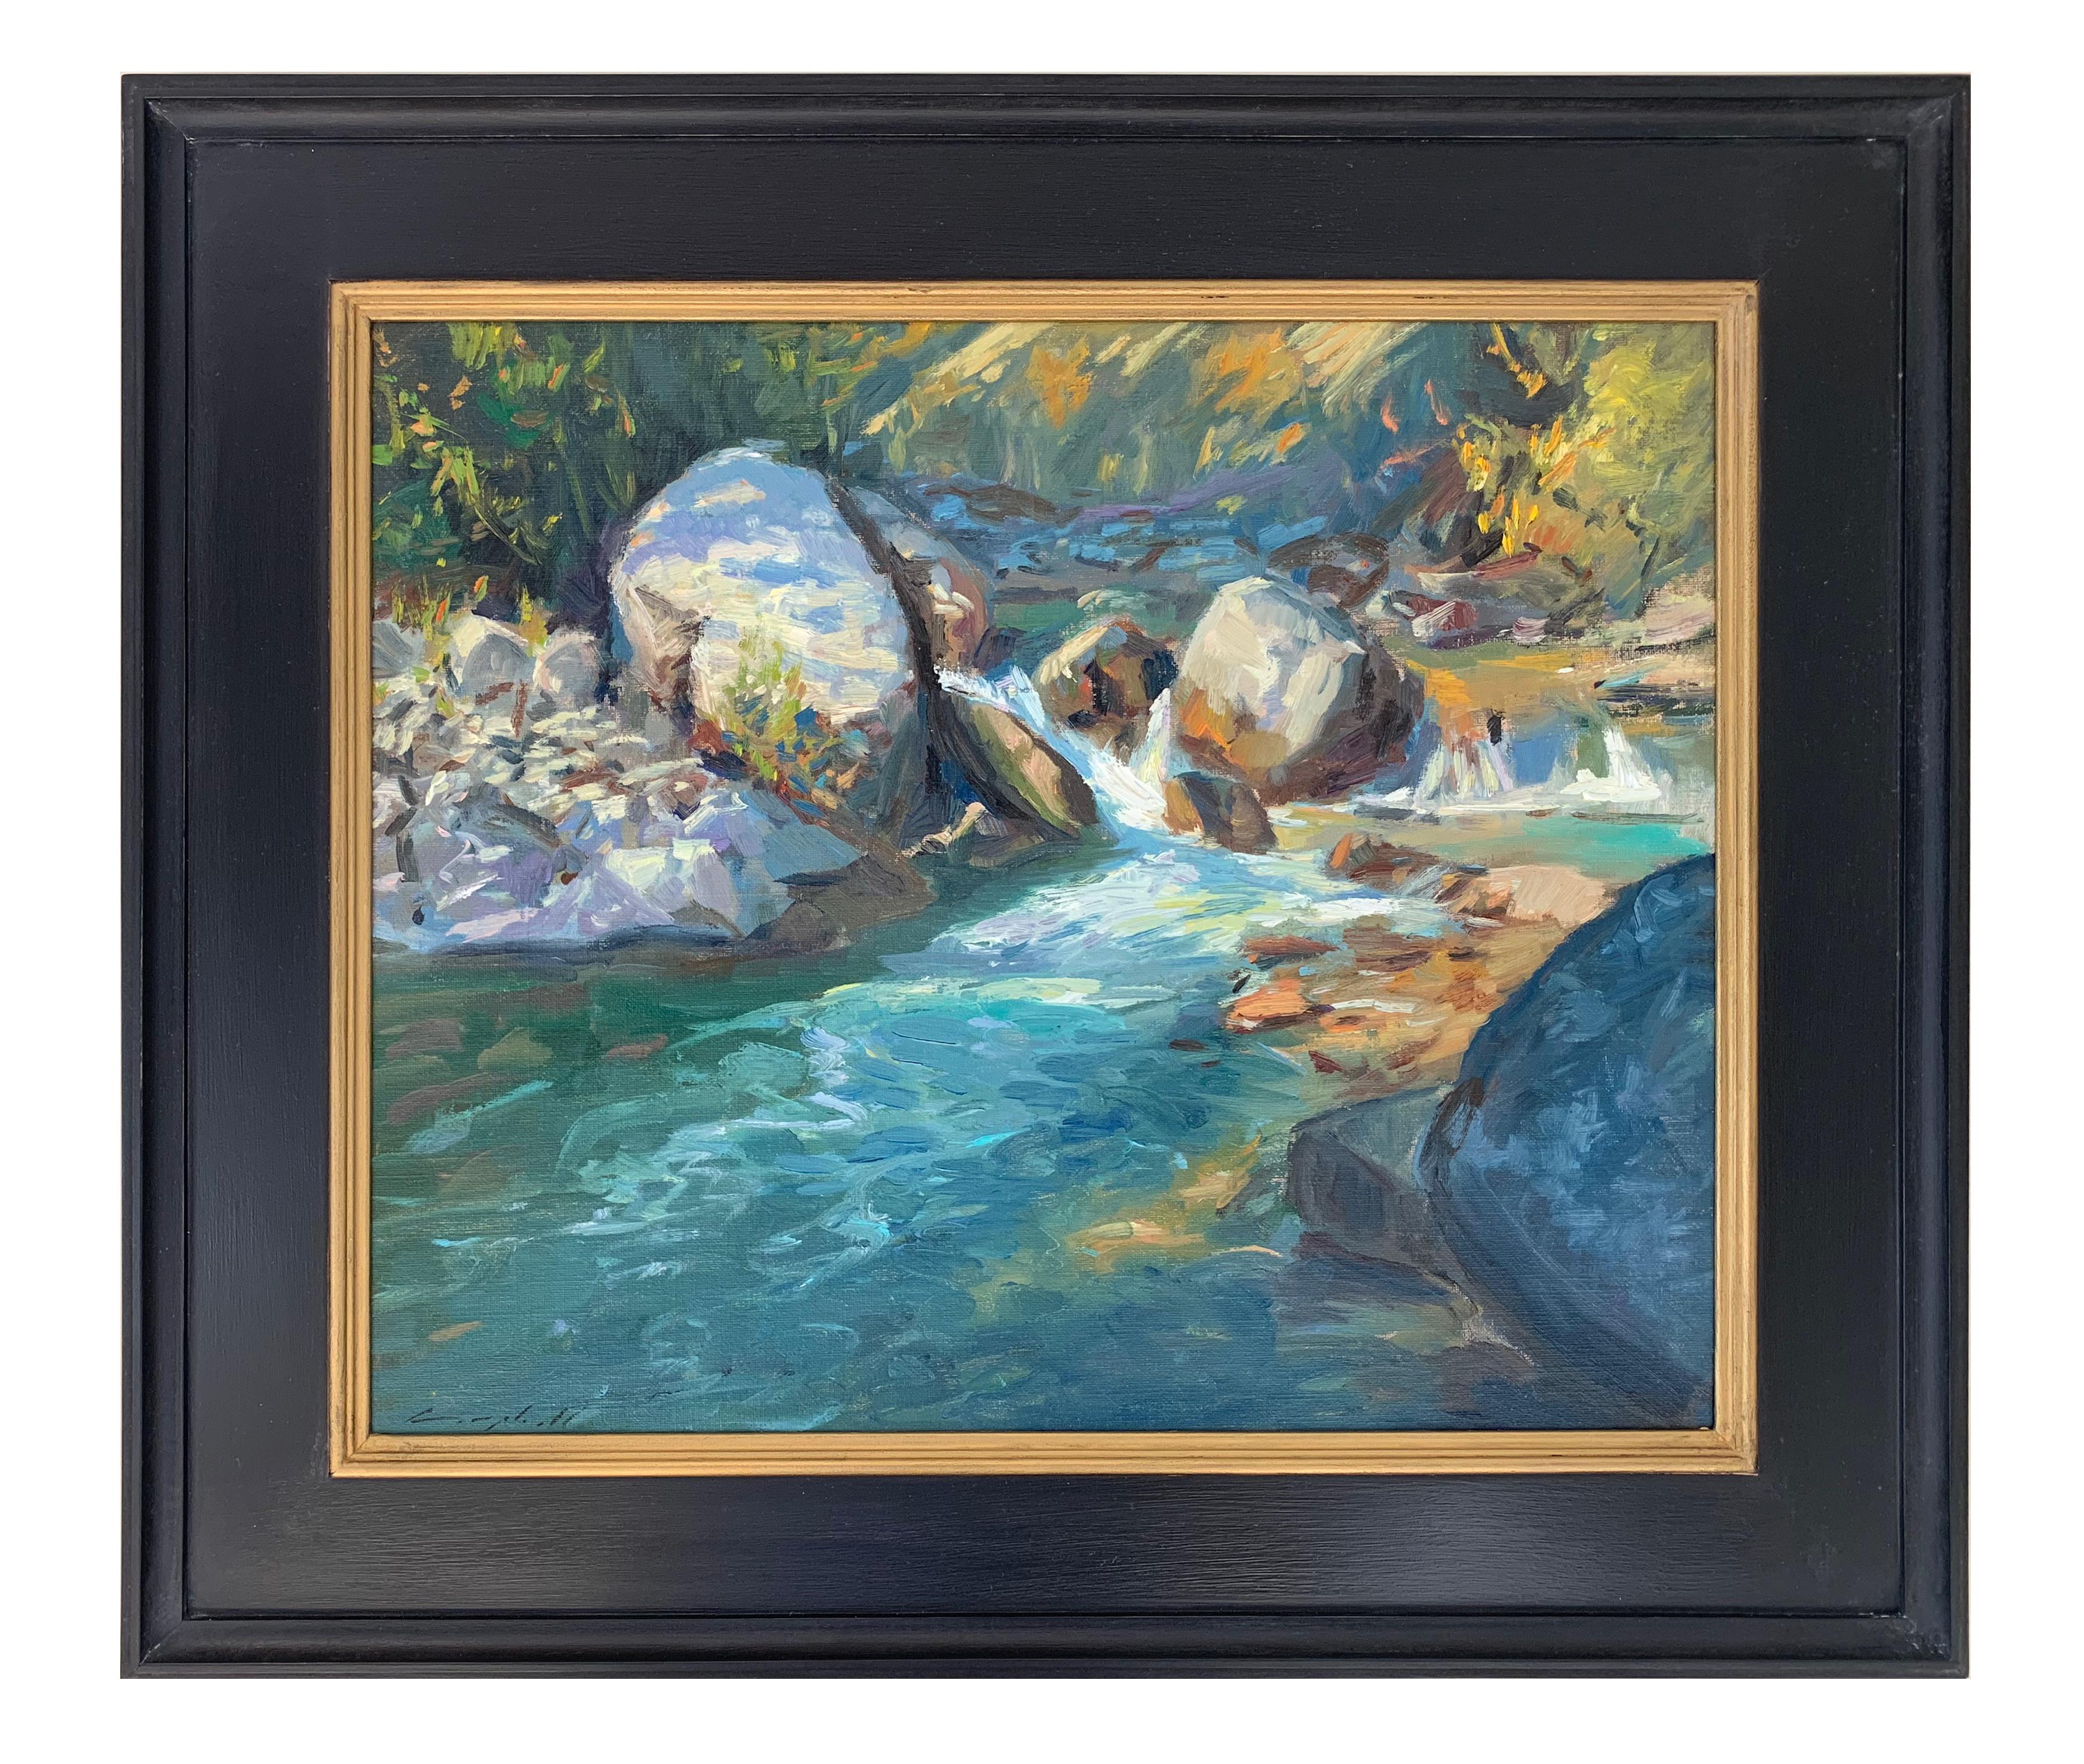 Peter Campbell Landscape Painting - Summer Creek (turquoise water, cascades, boulders, lush evergreens)